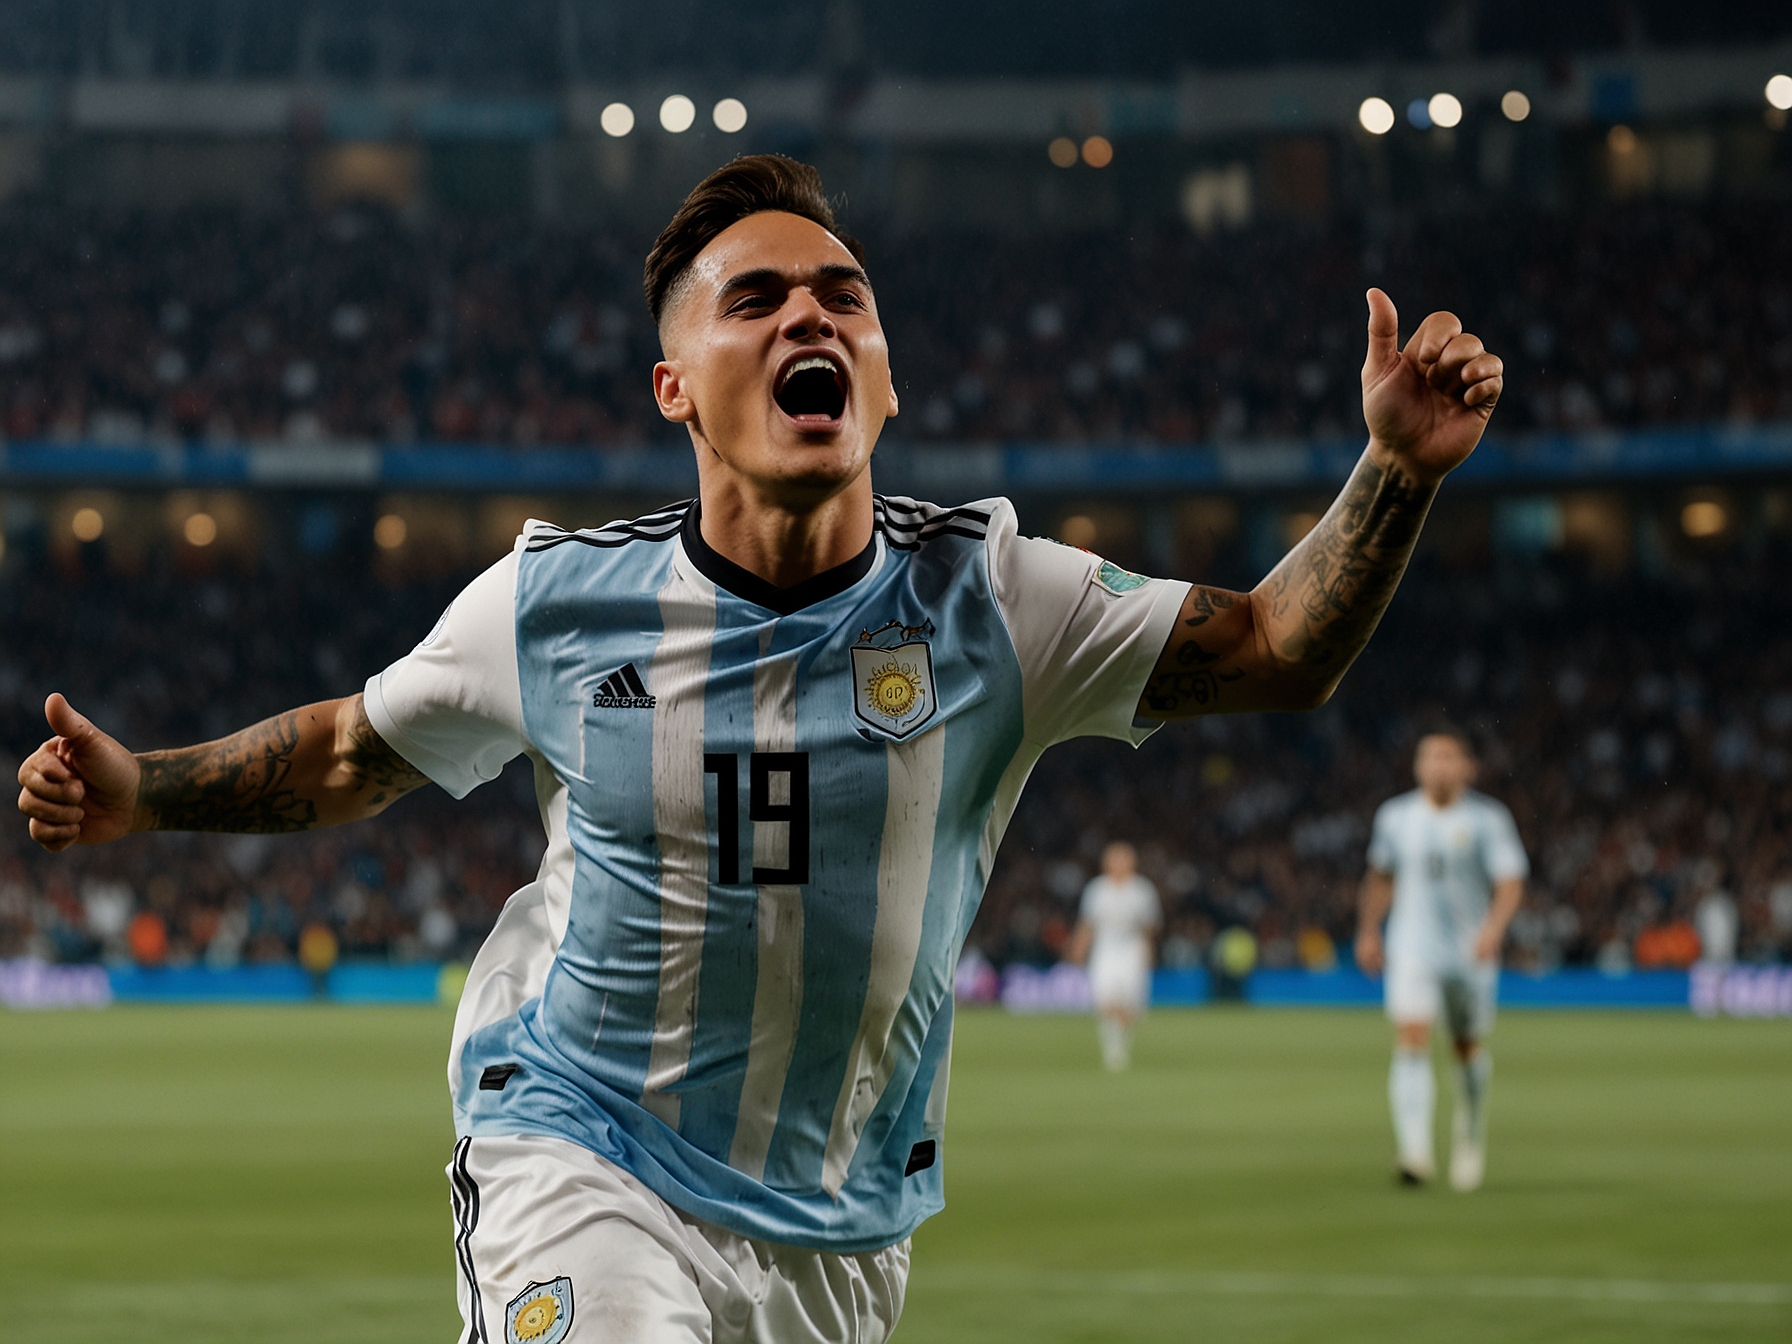 Lautaro Martinez celebrates after scoring the second goal for Argentina in a swift counter-attack. His clinical finish seals the 2-0 victory, with teammates joining in the jubilant moment.